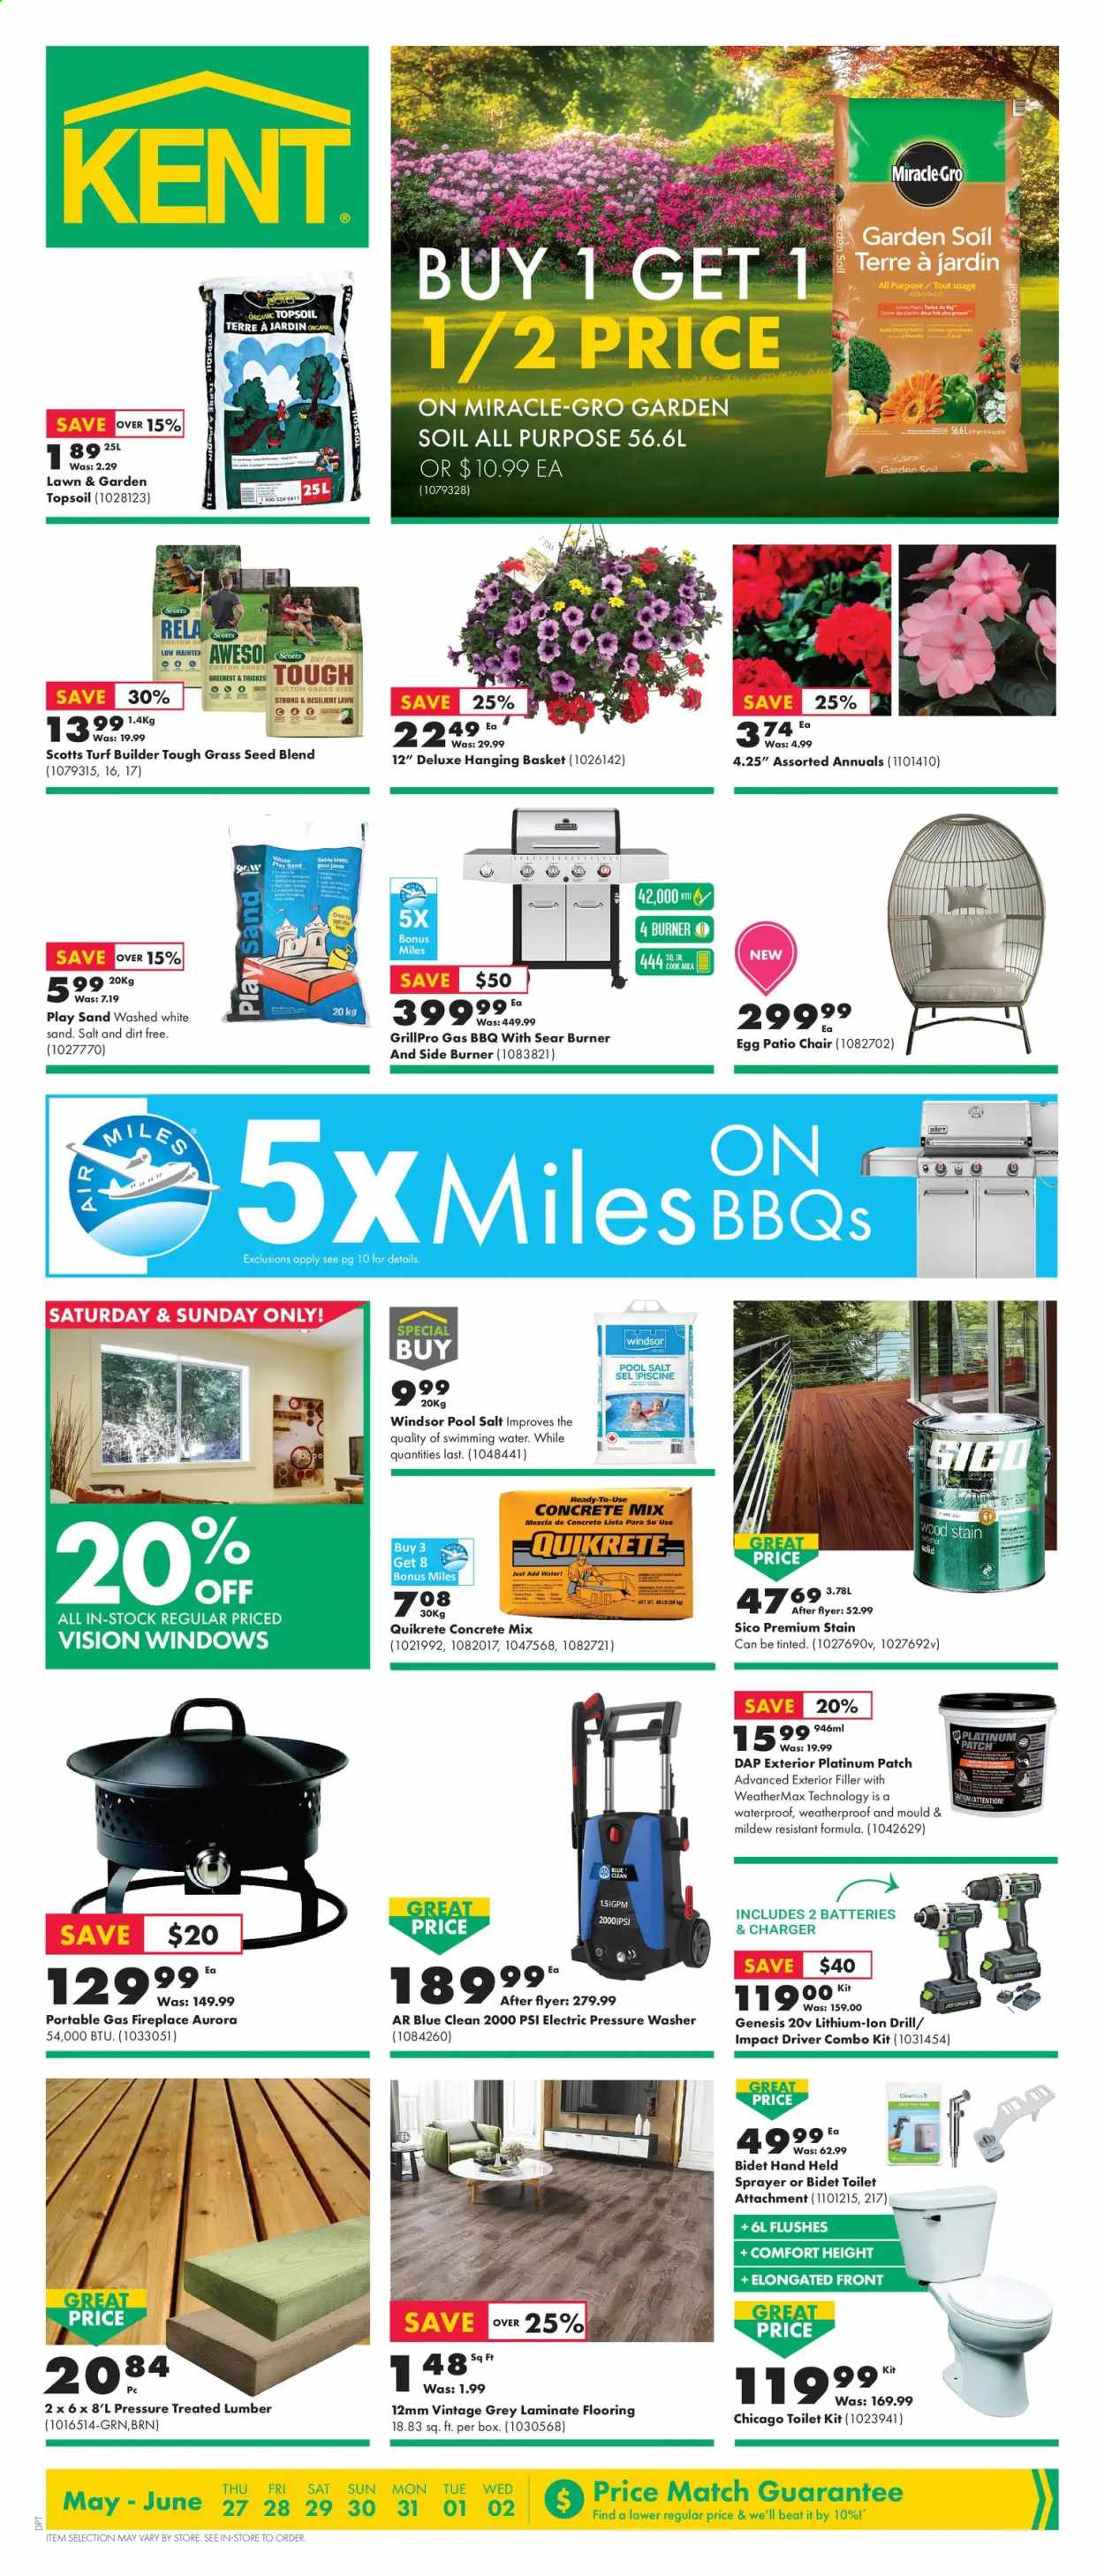 thumbnail - Kent Flyer - May 27, 2021 - June 02, 2021 - Sales products - toilet, fireplace, flooring, laminate floor, concrete mix, window, drill, impact driver, combo kit, electric pressure washer, pressure washer, pool salt, plant seeds, turf builder, garden soil, sprayer, grass seed, chair. Page 1.